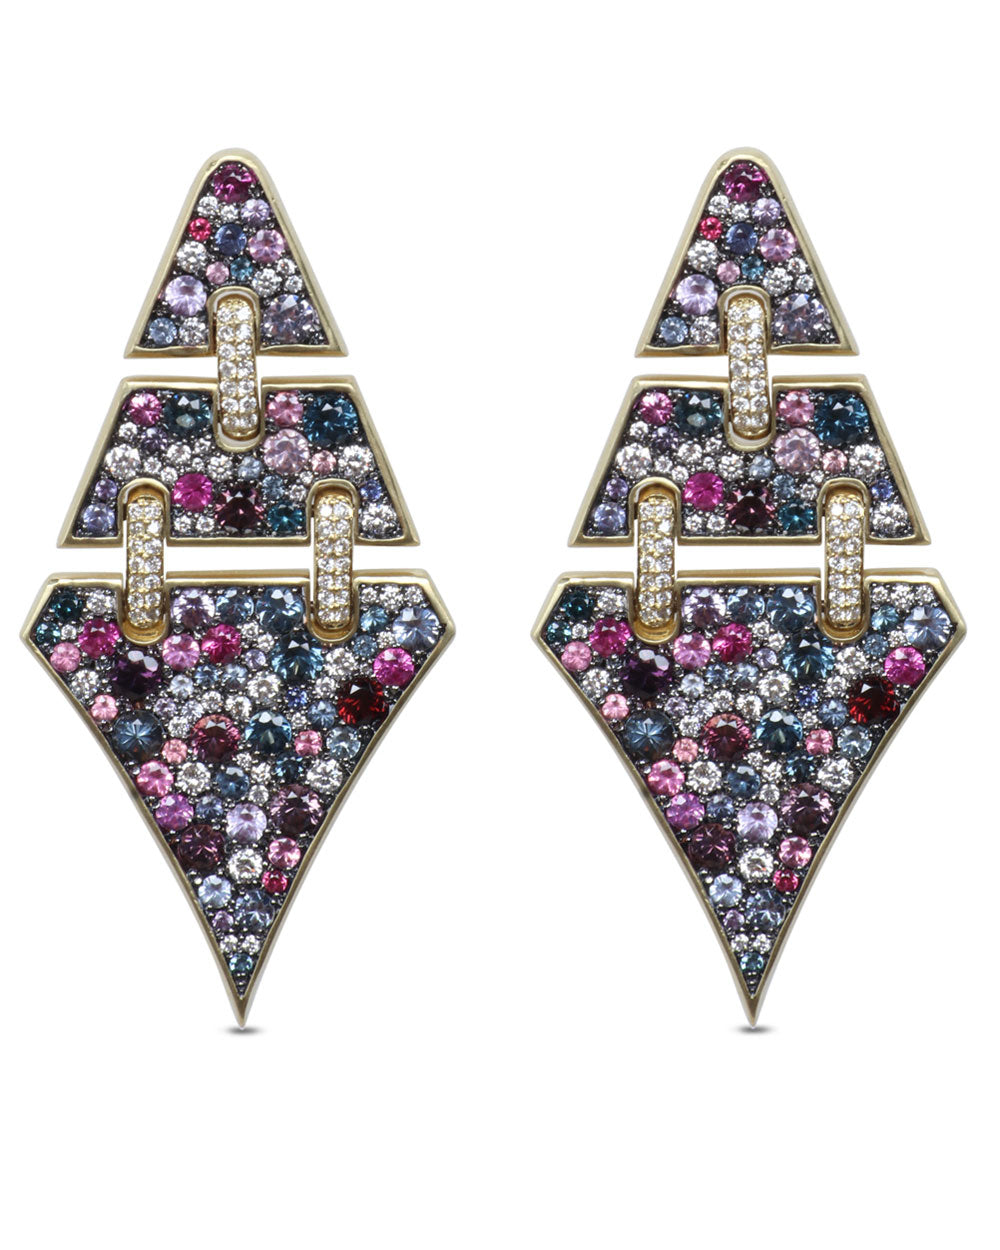 Diamond and Multi Spinel Earrings